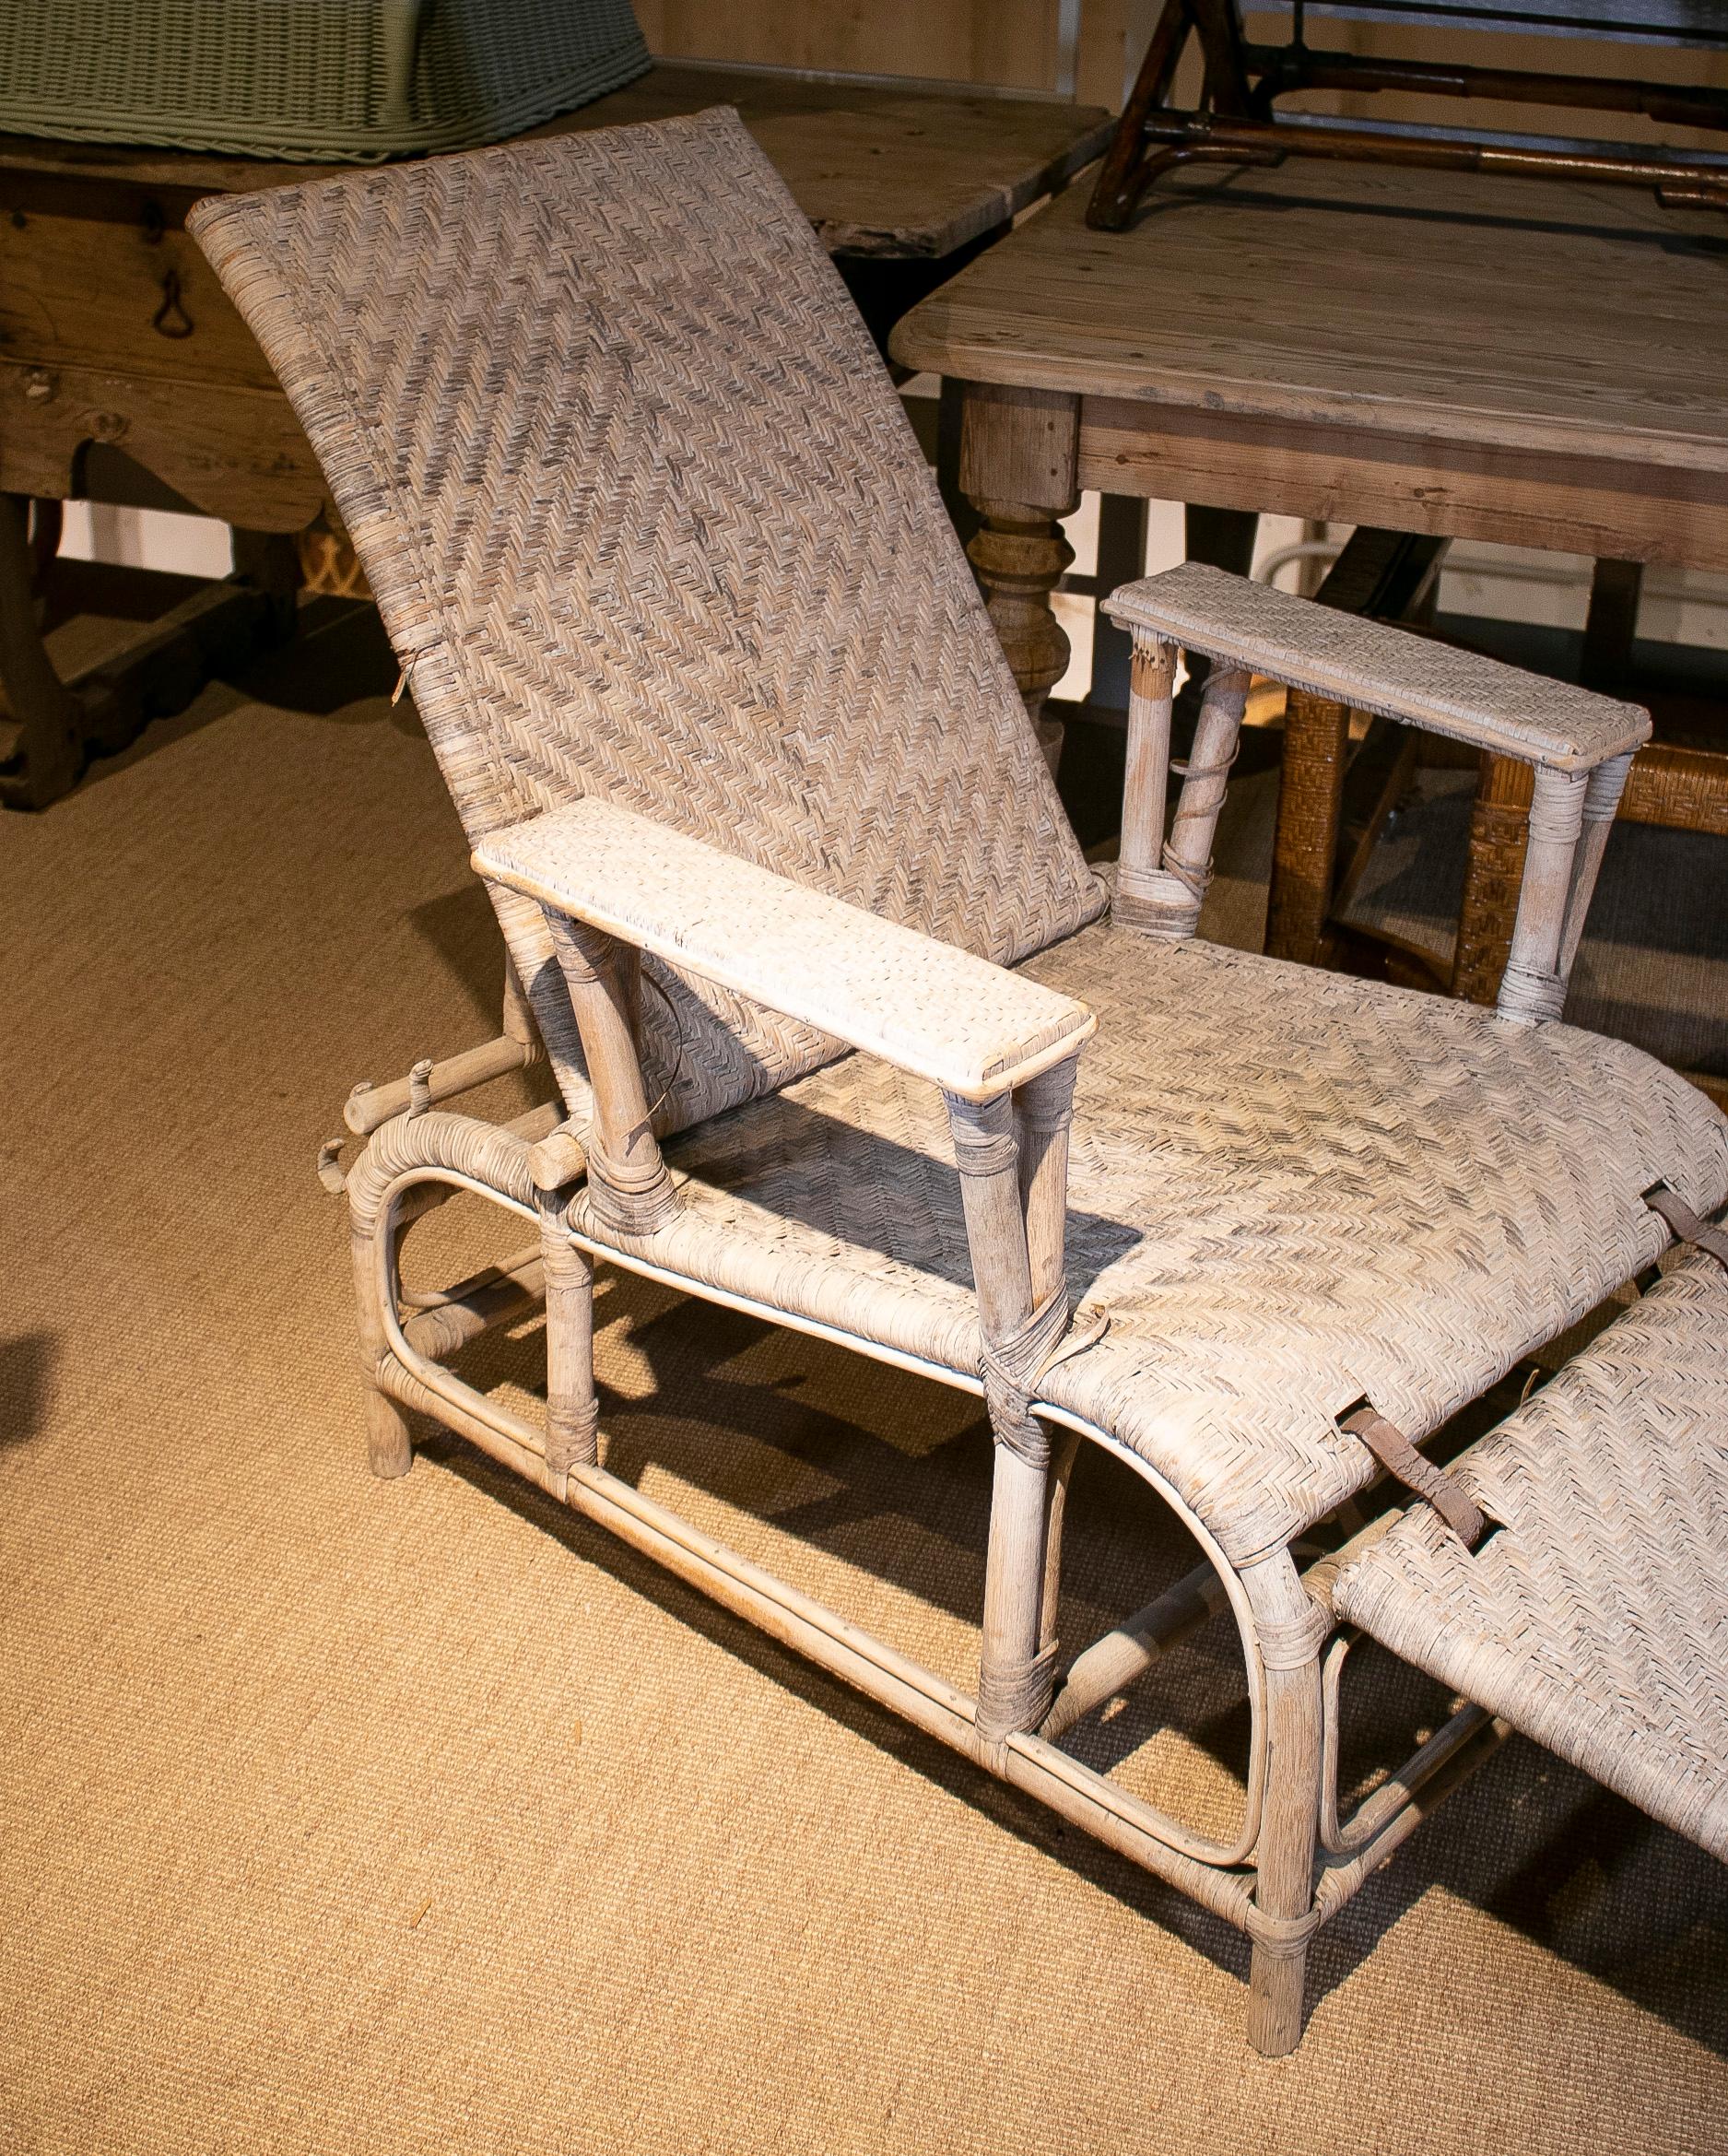 Vintage 1980s Spanish white bamboo and wicker folding sunbathing lounge chair.